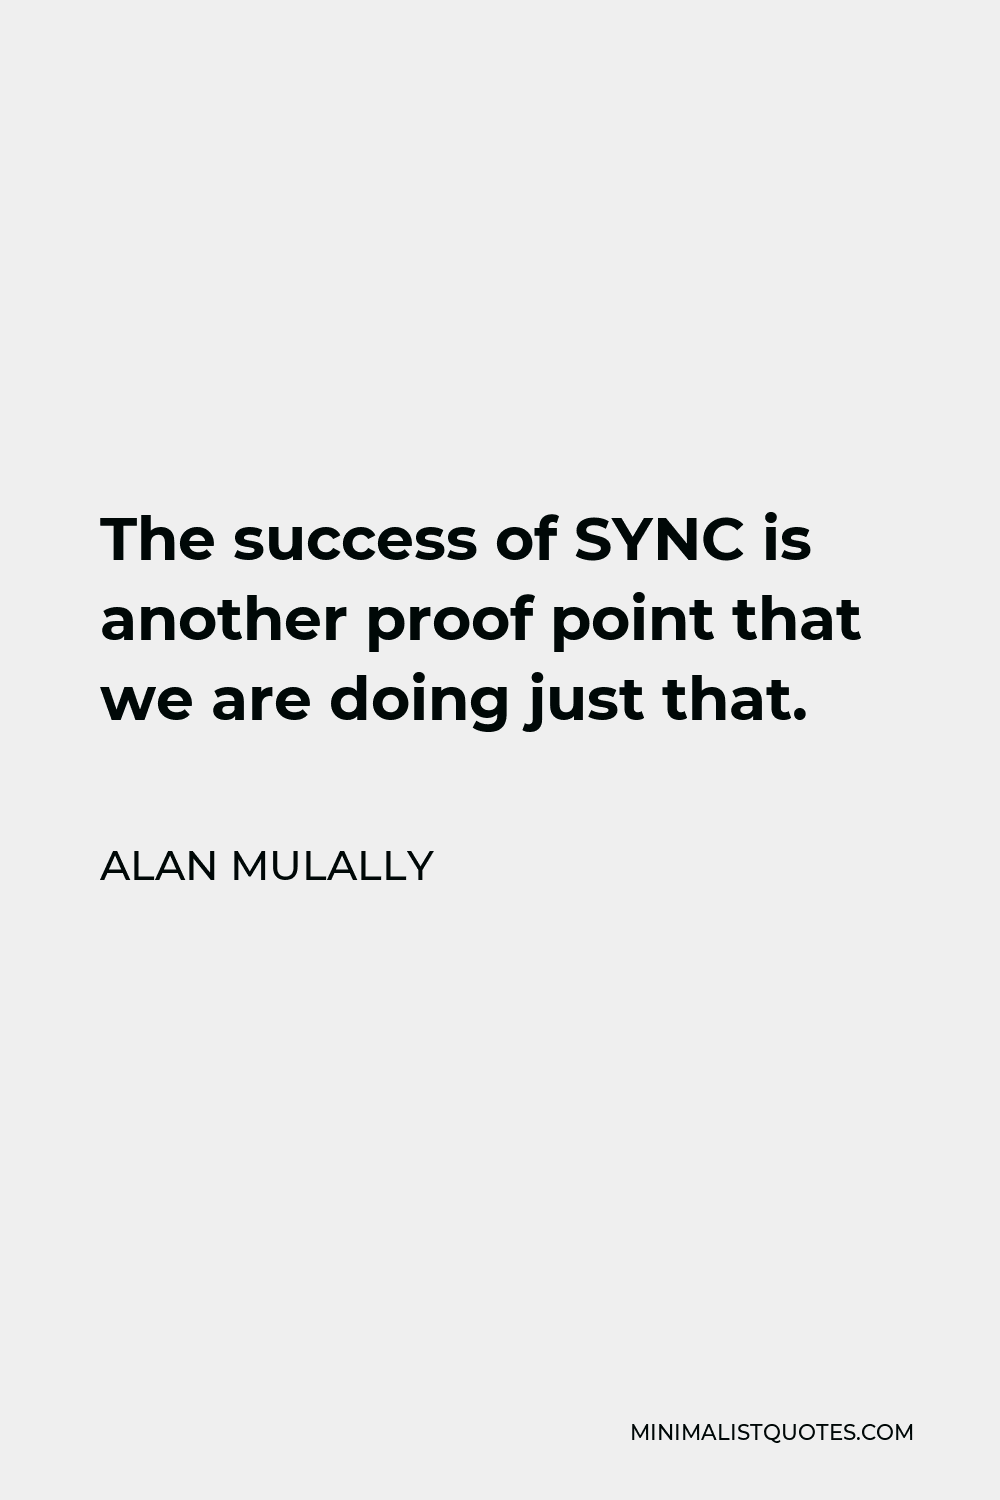 Alan Mulally Quote - The success of SYNC is another proof point that we are doing just that.